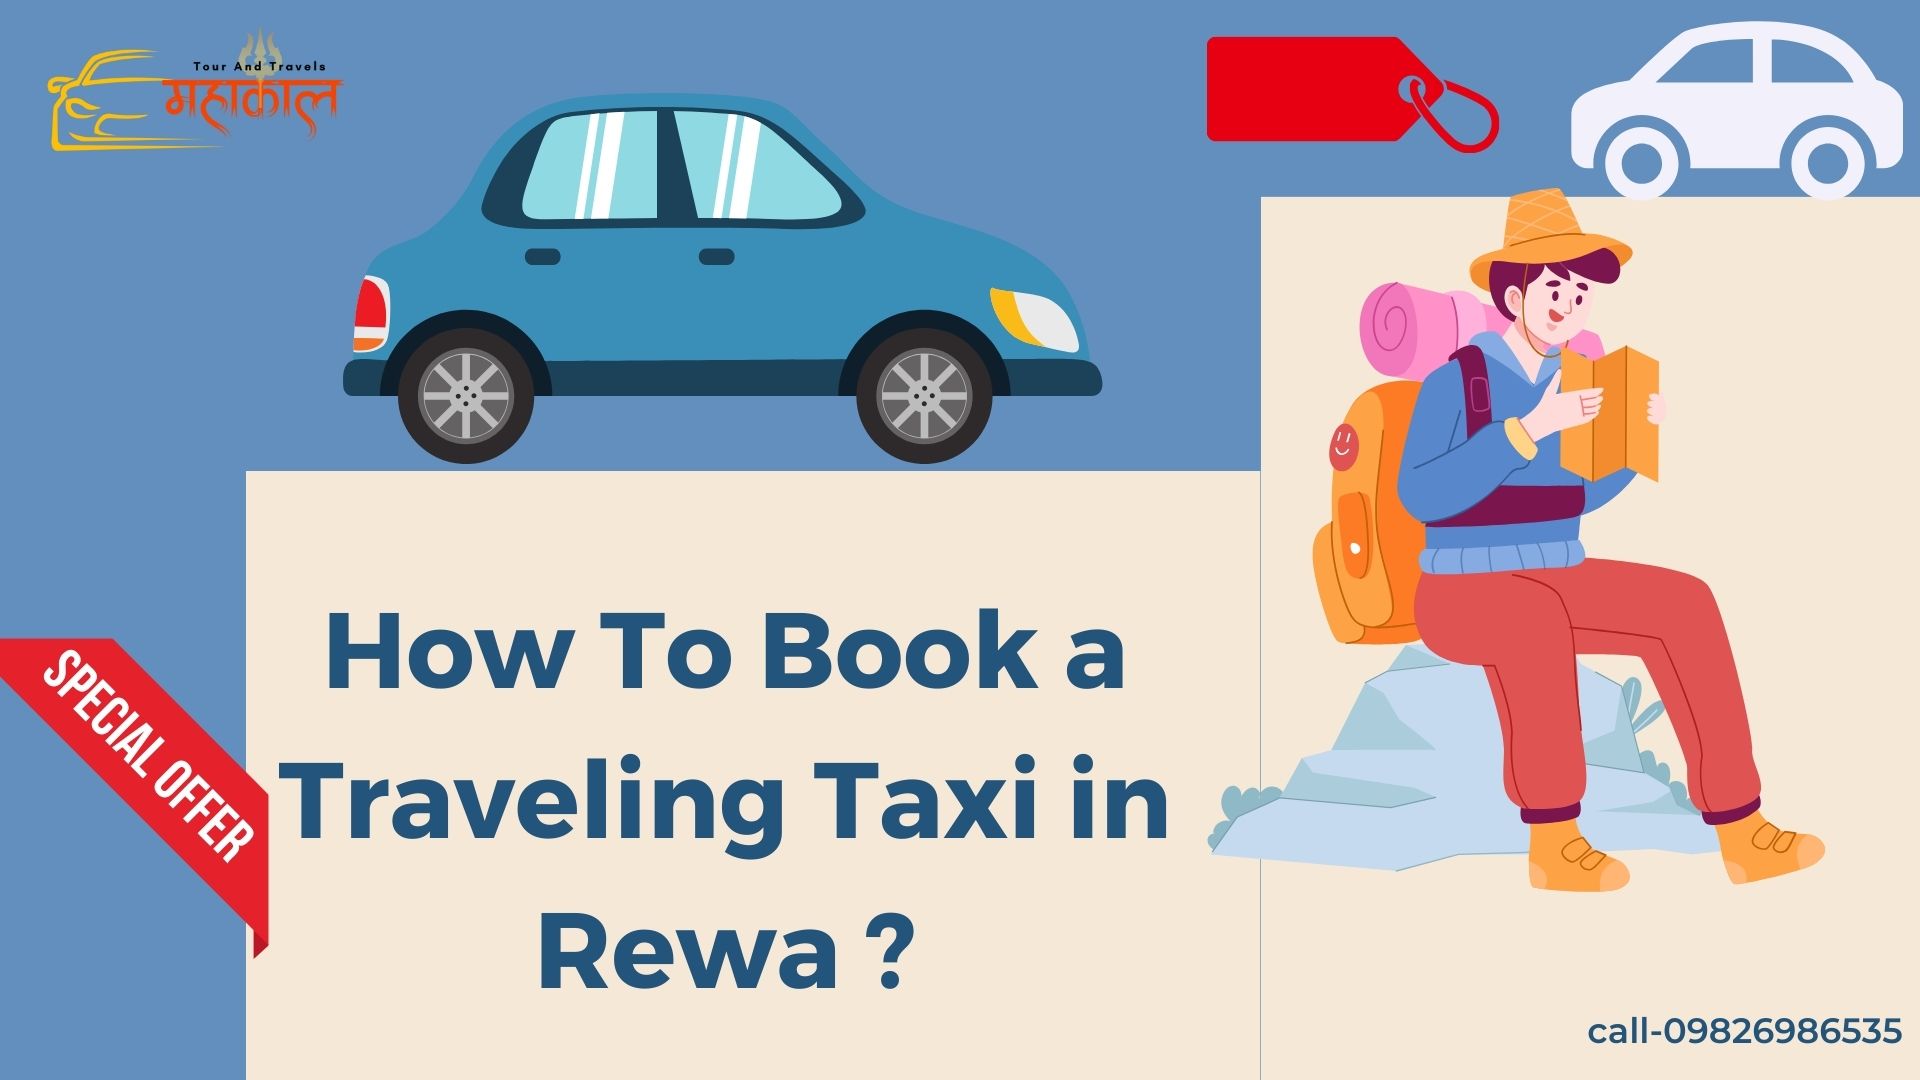 How To Book Traveling Taxi in Rewa